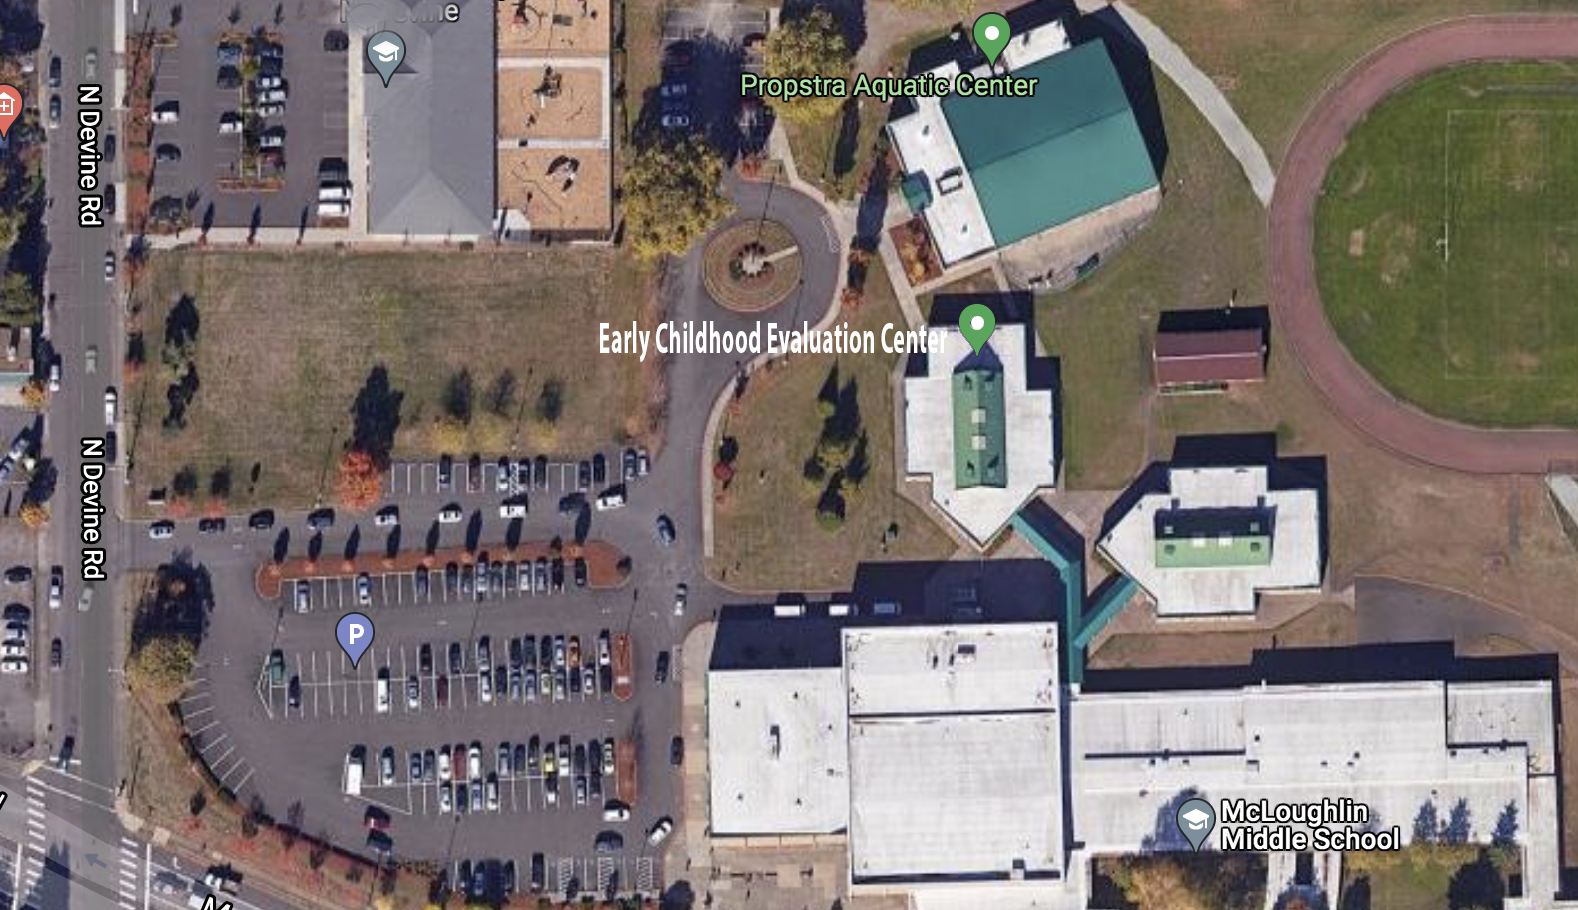 Early Childhood Evaluation Center location